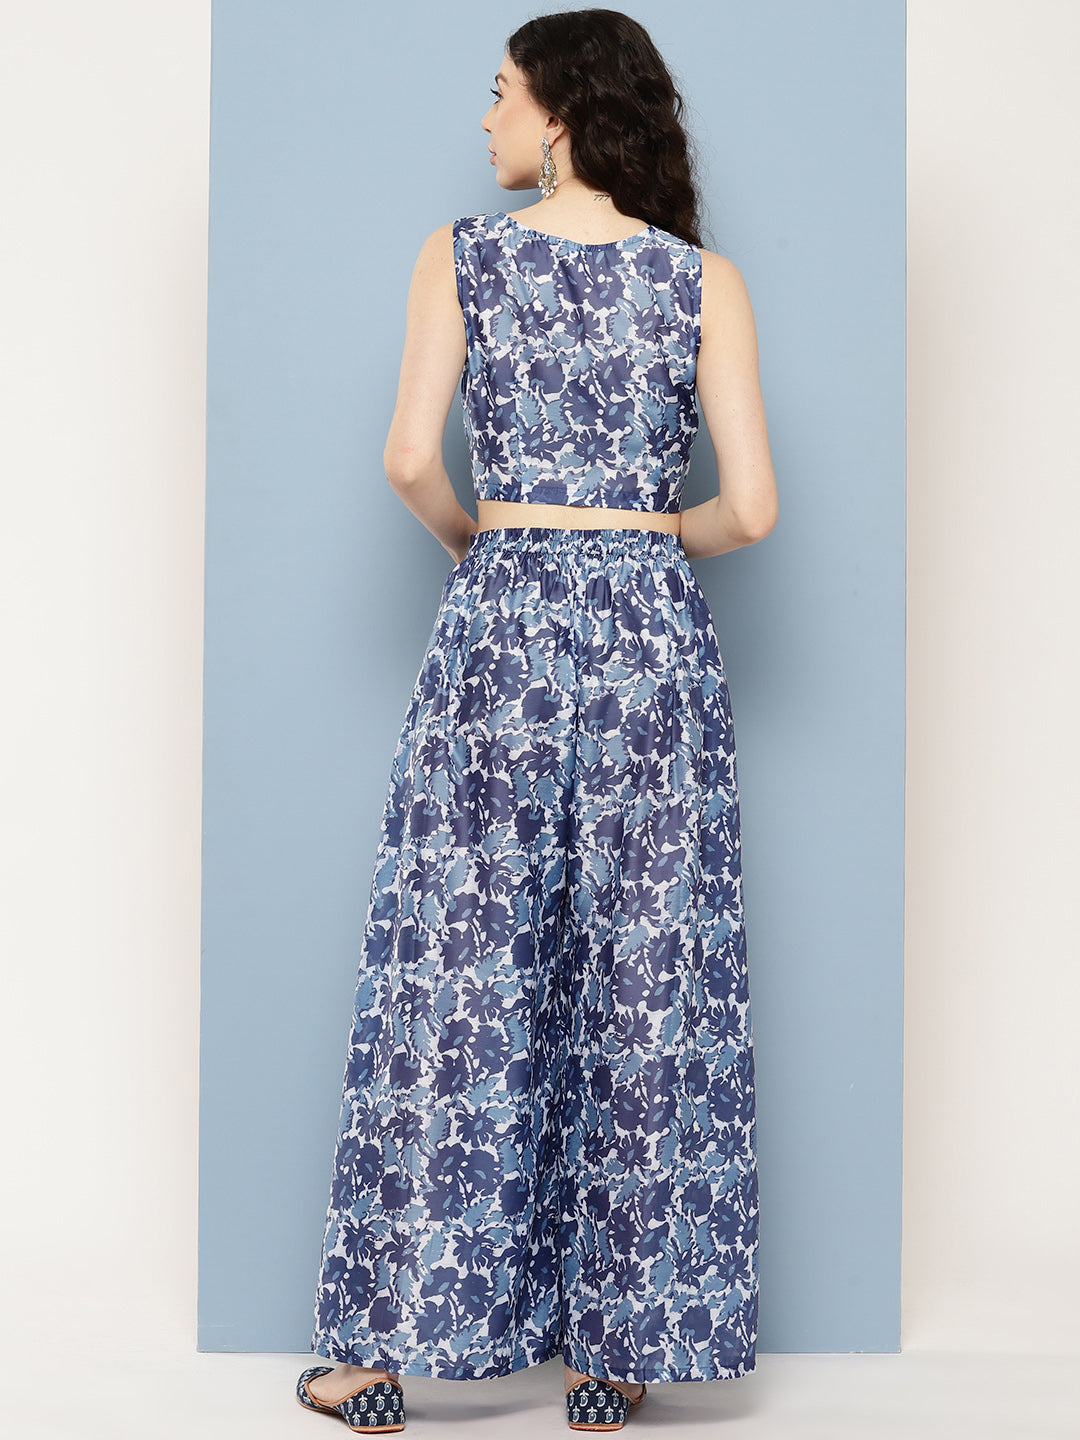 Navy Blue Printed Ethnic Co-Ords